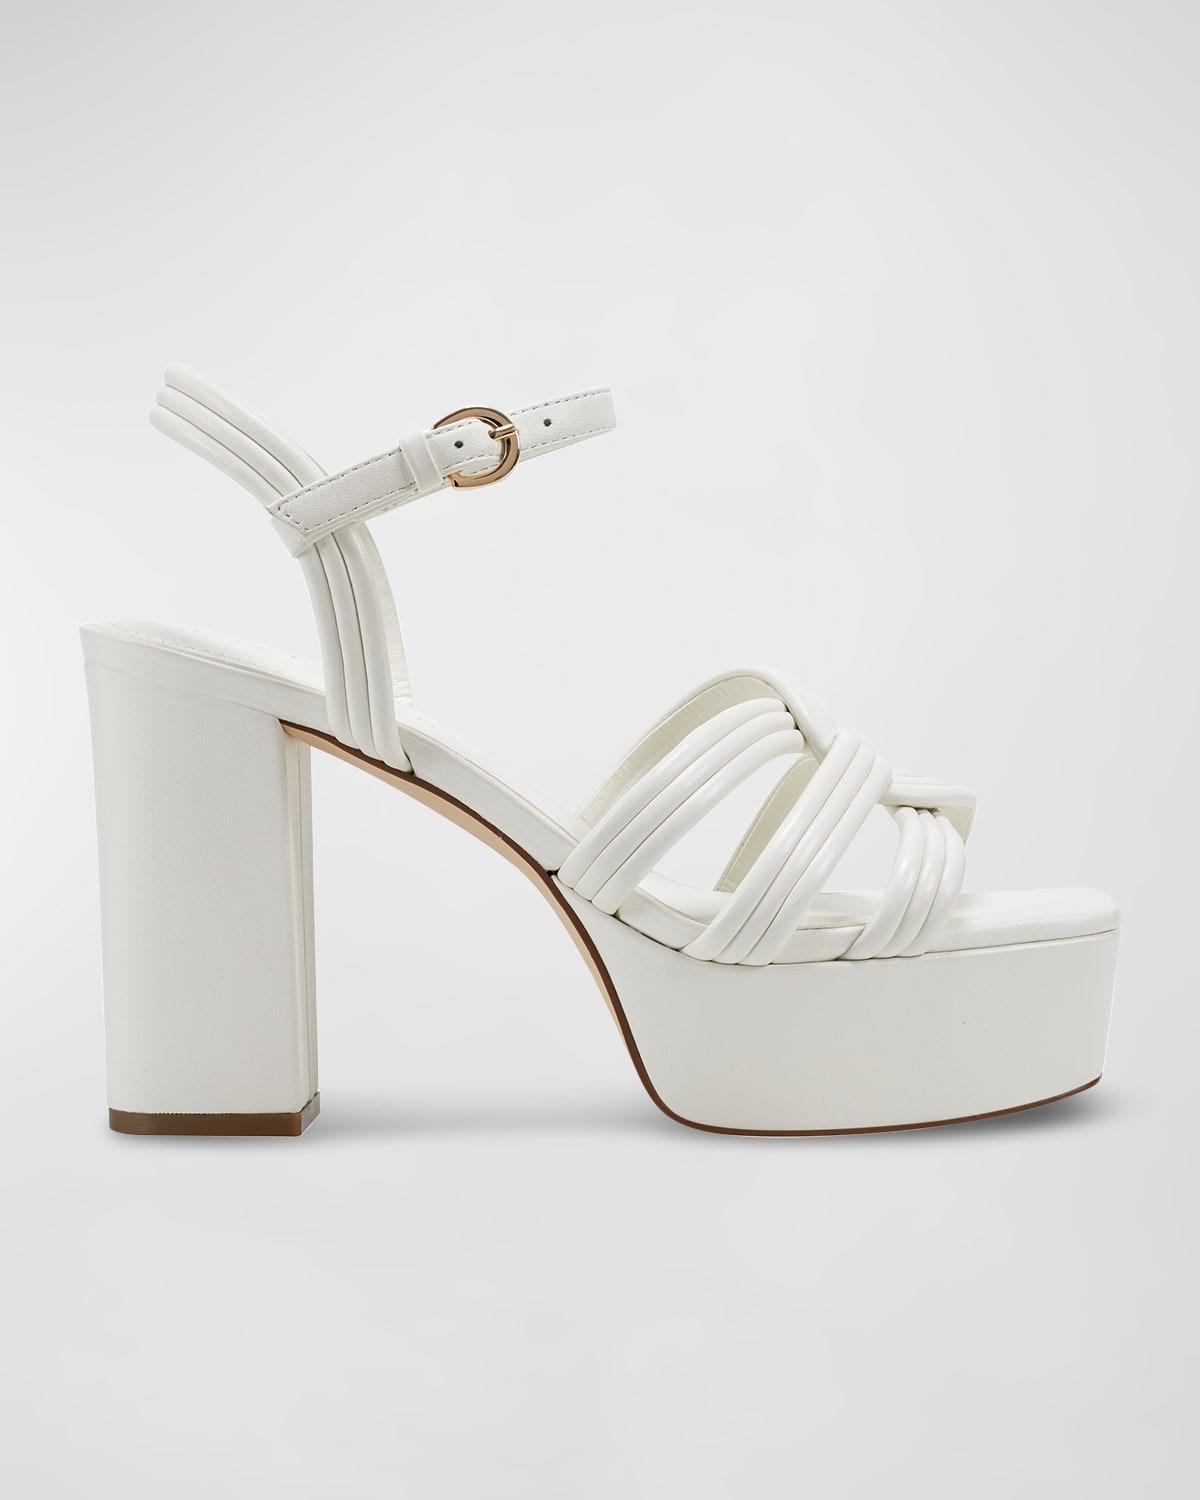 Leather Woven Ankle-Strap Platform Sandals Product Image